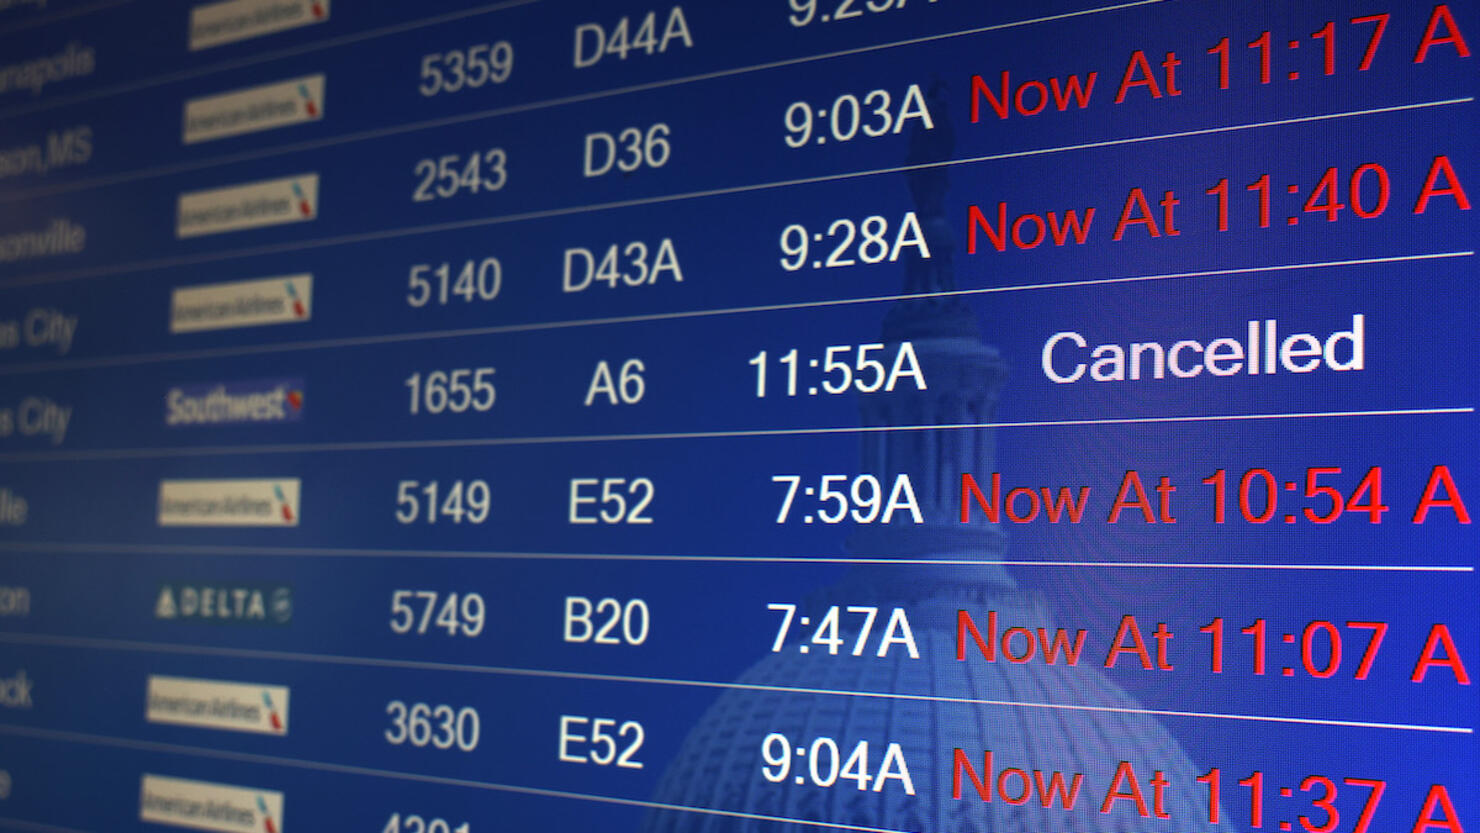 FAA System Outage Causes Nationwide Flight Departure Stoppage